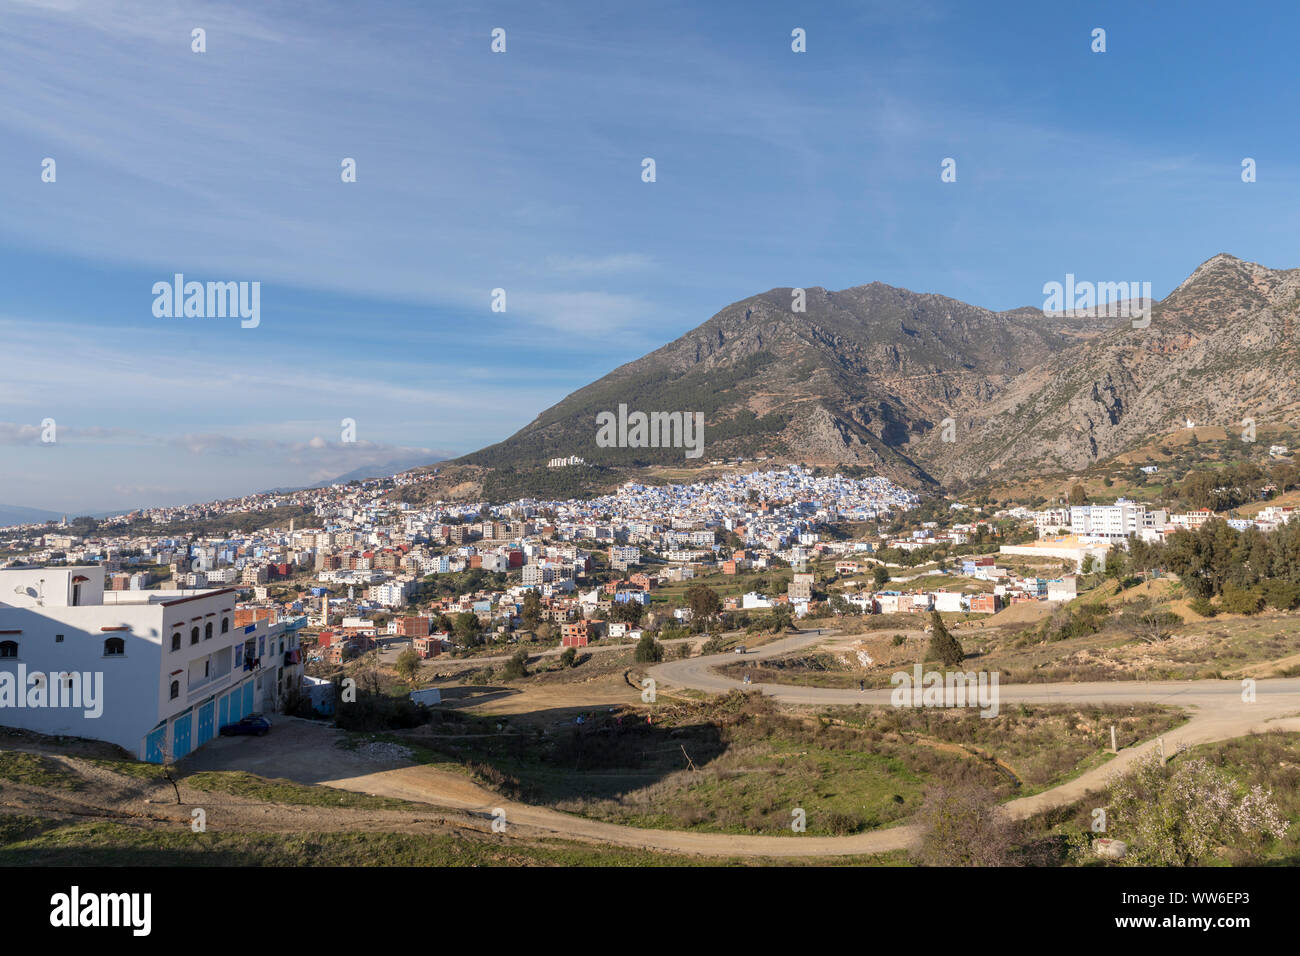 View of the city Chefchaouen, Morocco, North Africa, Africa Stock Photo